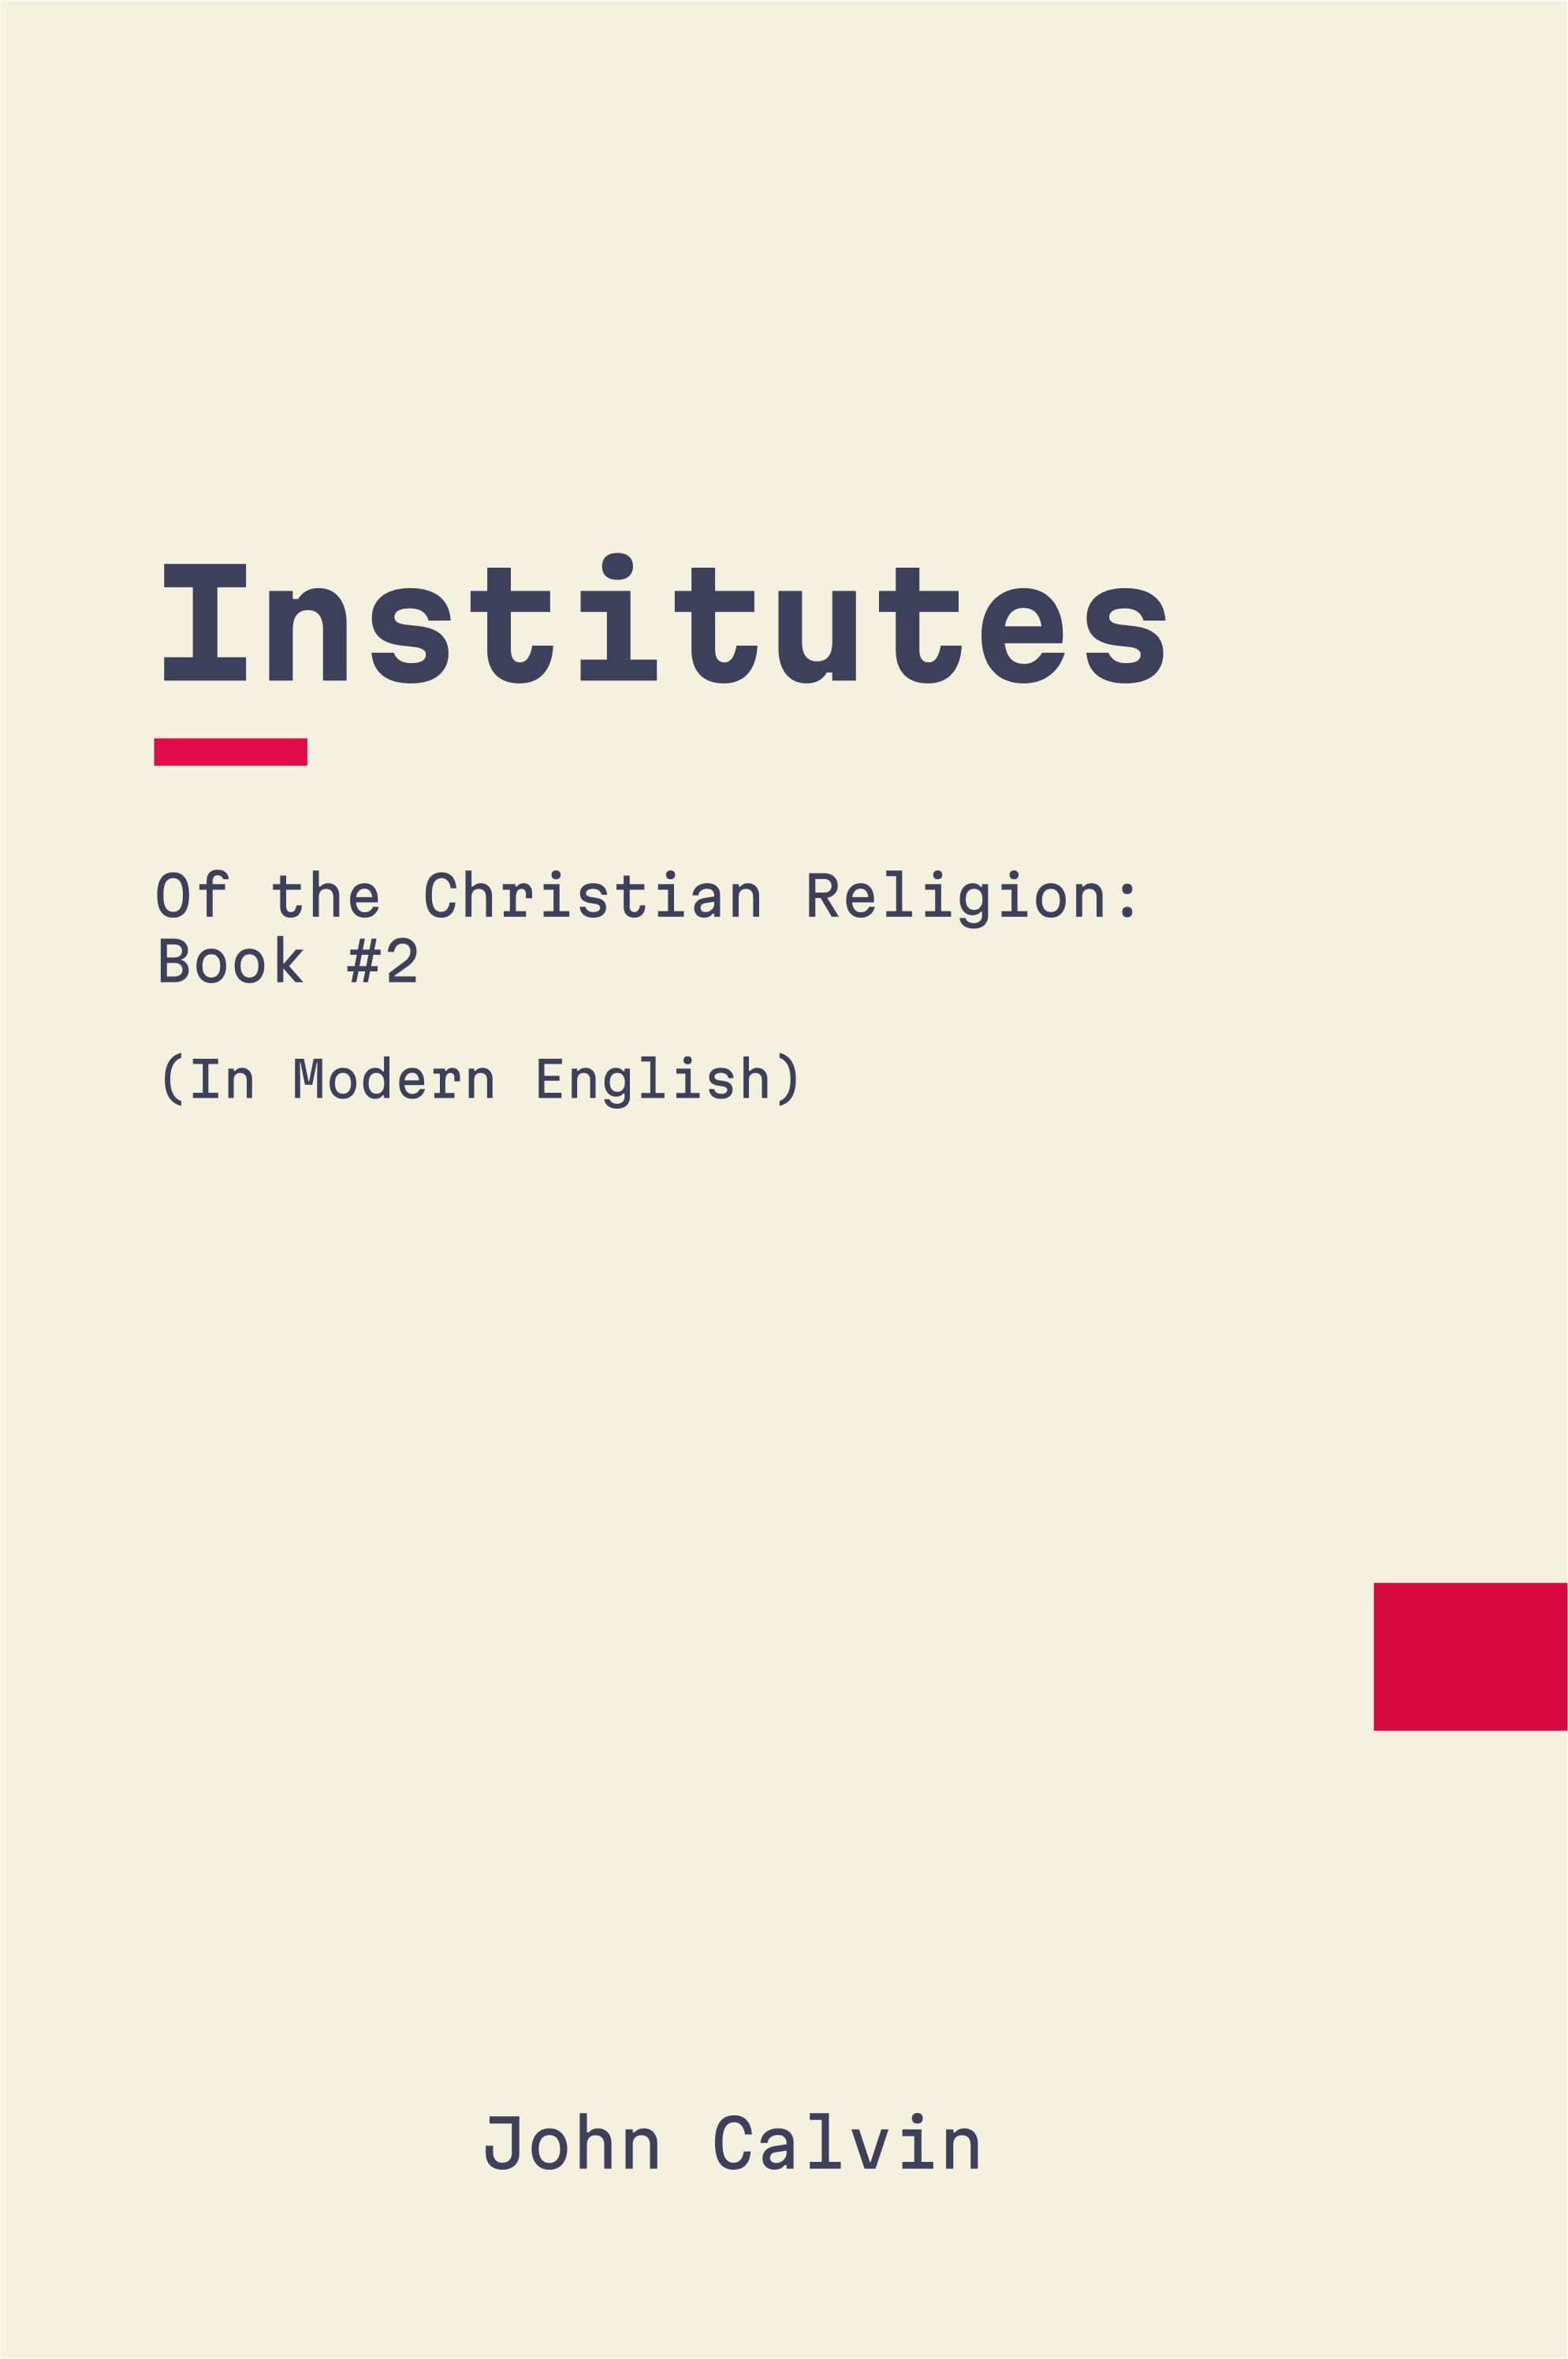 Institutes of the Christian Religion: Book 2 (Modern English)